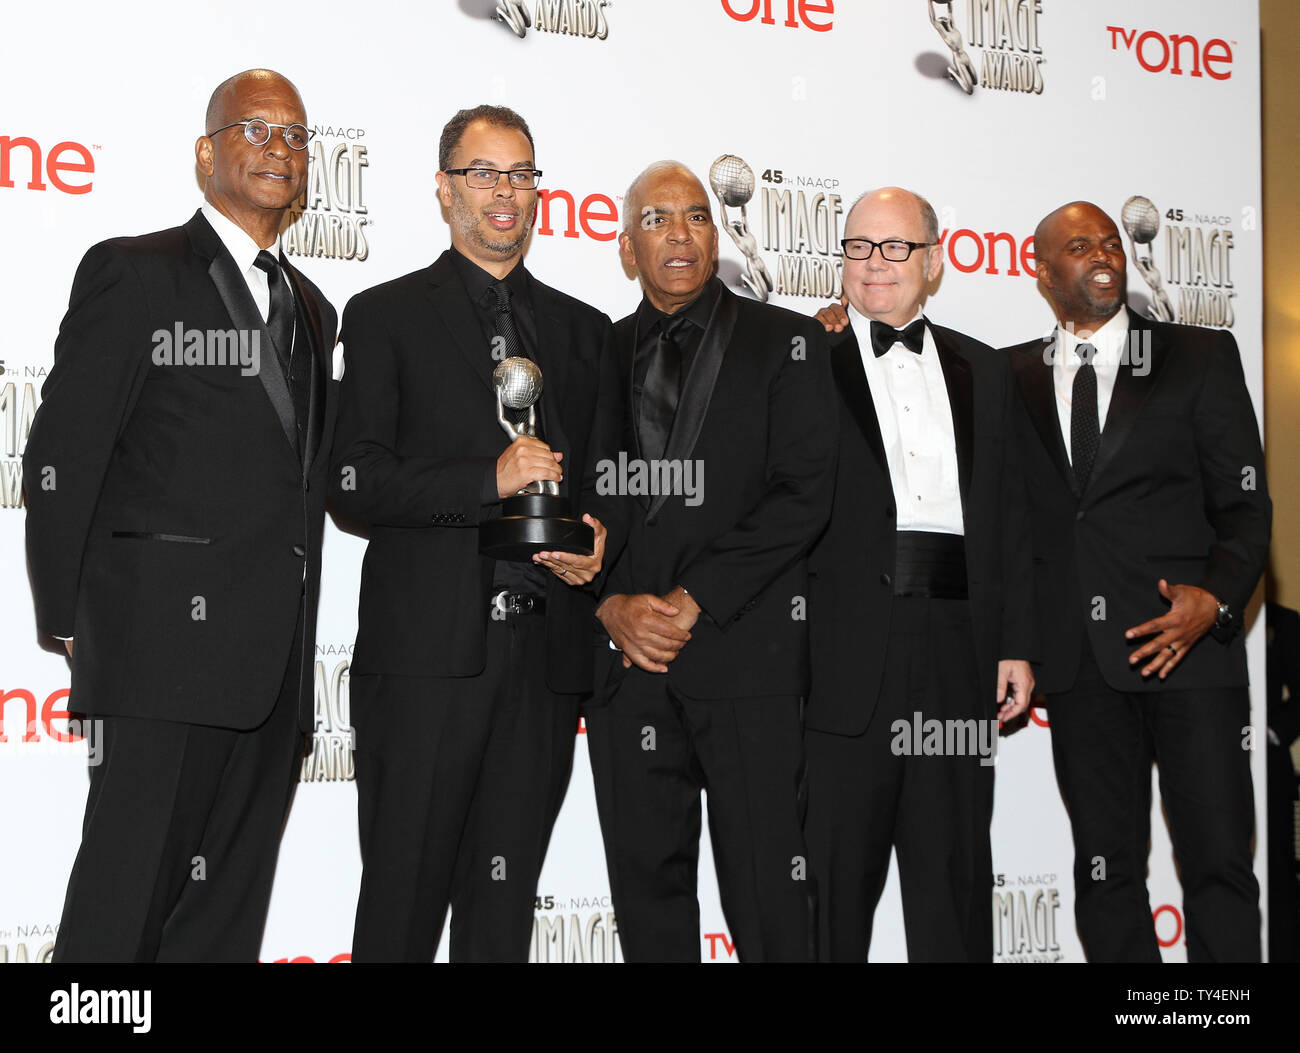 Producers of Real Husbands of Hollywood Ralph Farquhar, Jesse Collins, Stan Lathan, Tim Gibbons, and Chris Spencer hold the award they won for Outstanding Comedy Series for 'Real Husbands of Hollywood' backstage at the 45th NAACP Image Awards at the Pasadena Civic Auditorium in Pasadena, California on February 22, 2014. The NAACP Image Awards celebrates the accomplishments of people of color in the fields of television, music, literature and film and also honors individuals or groups who promote social justice through creative endeavors.   UPI/Ken Matsui Stock Photo